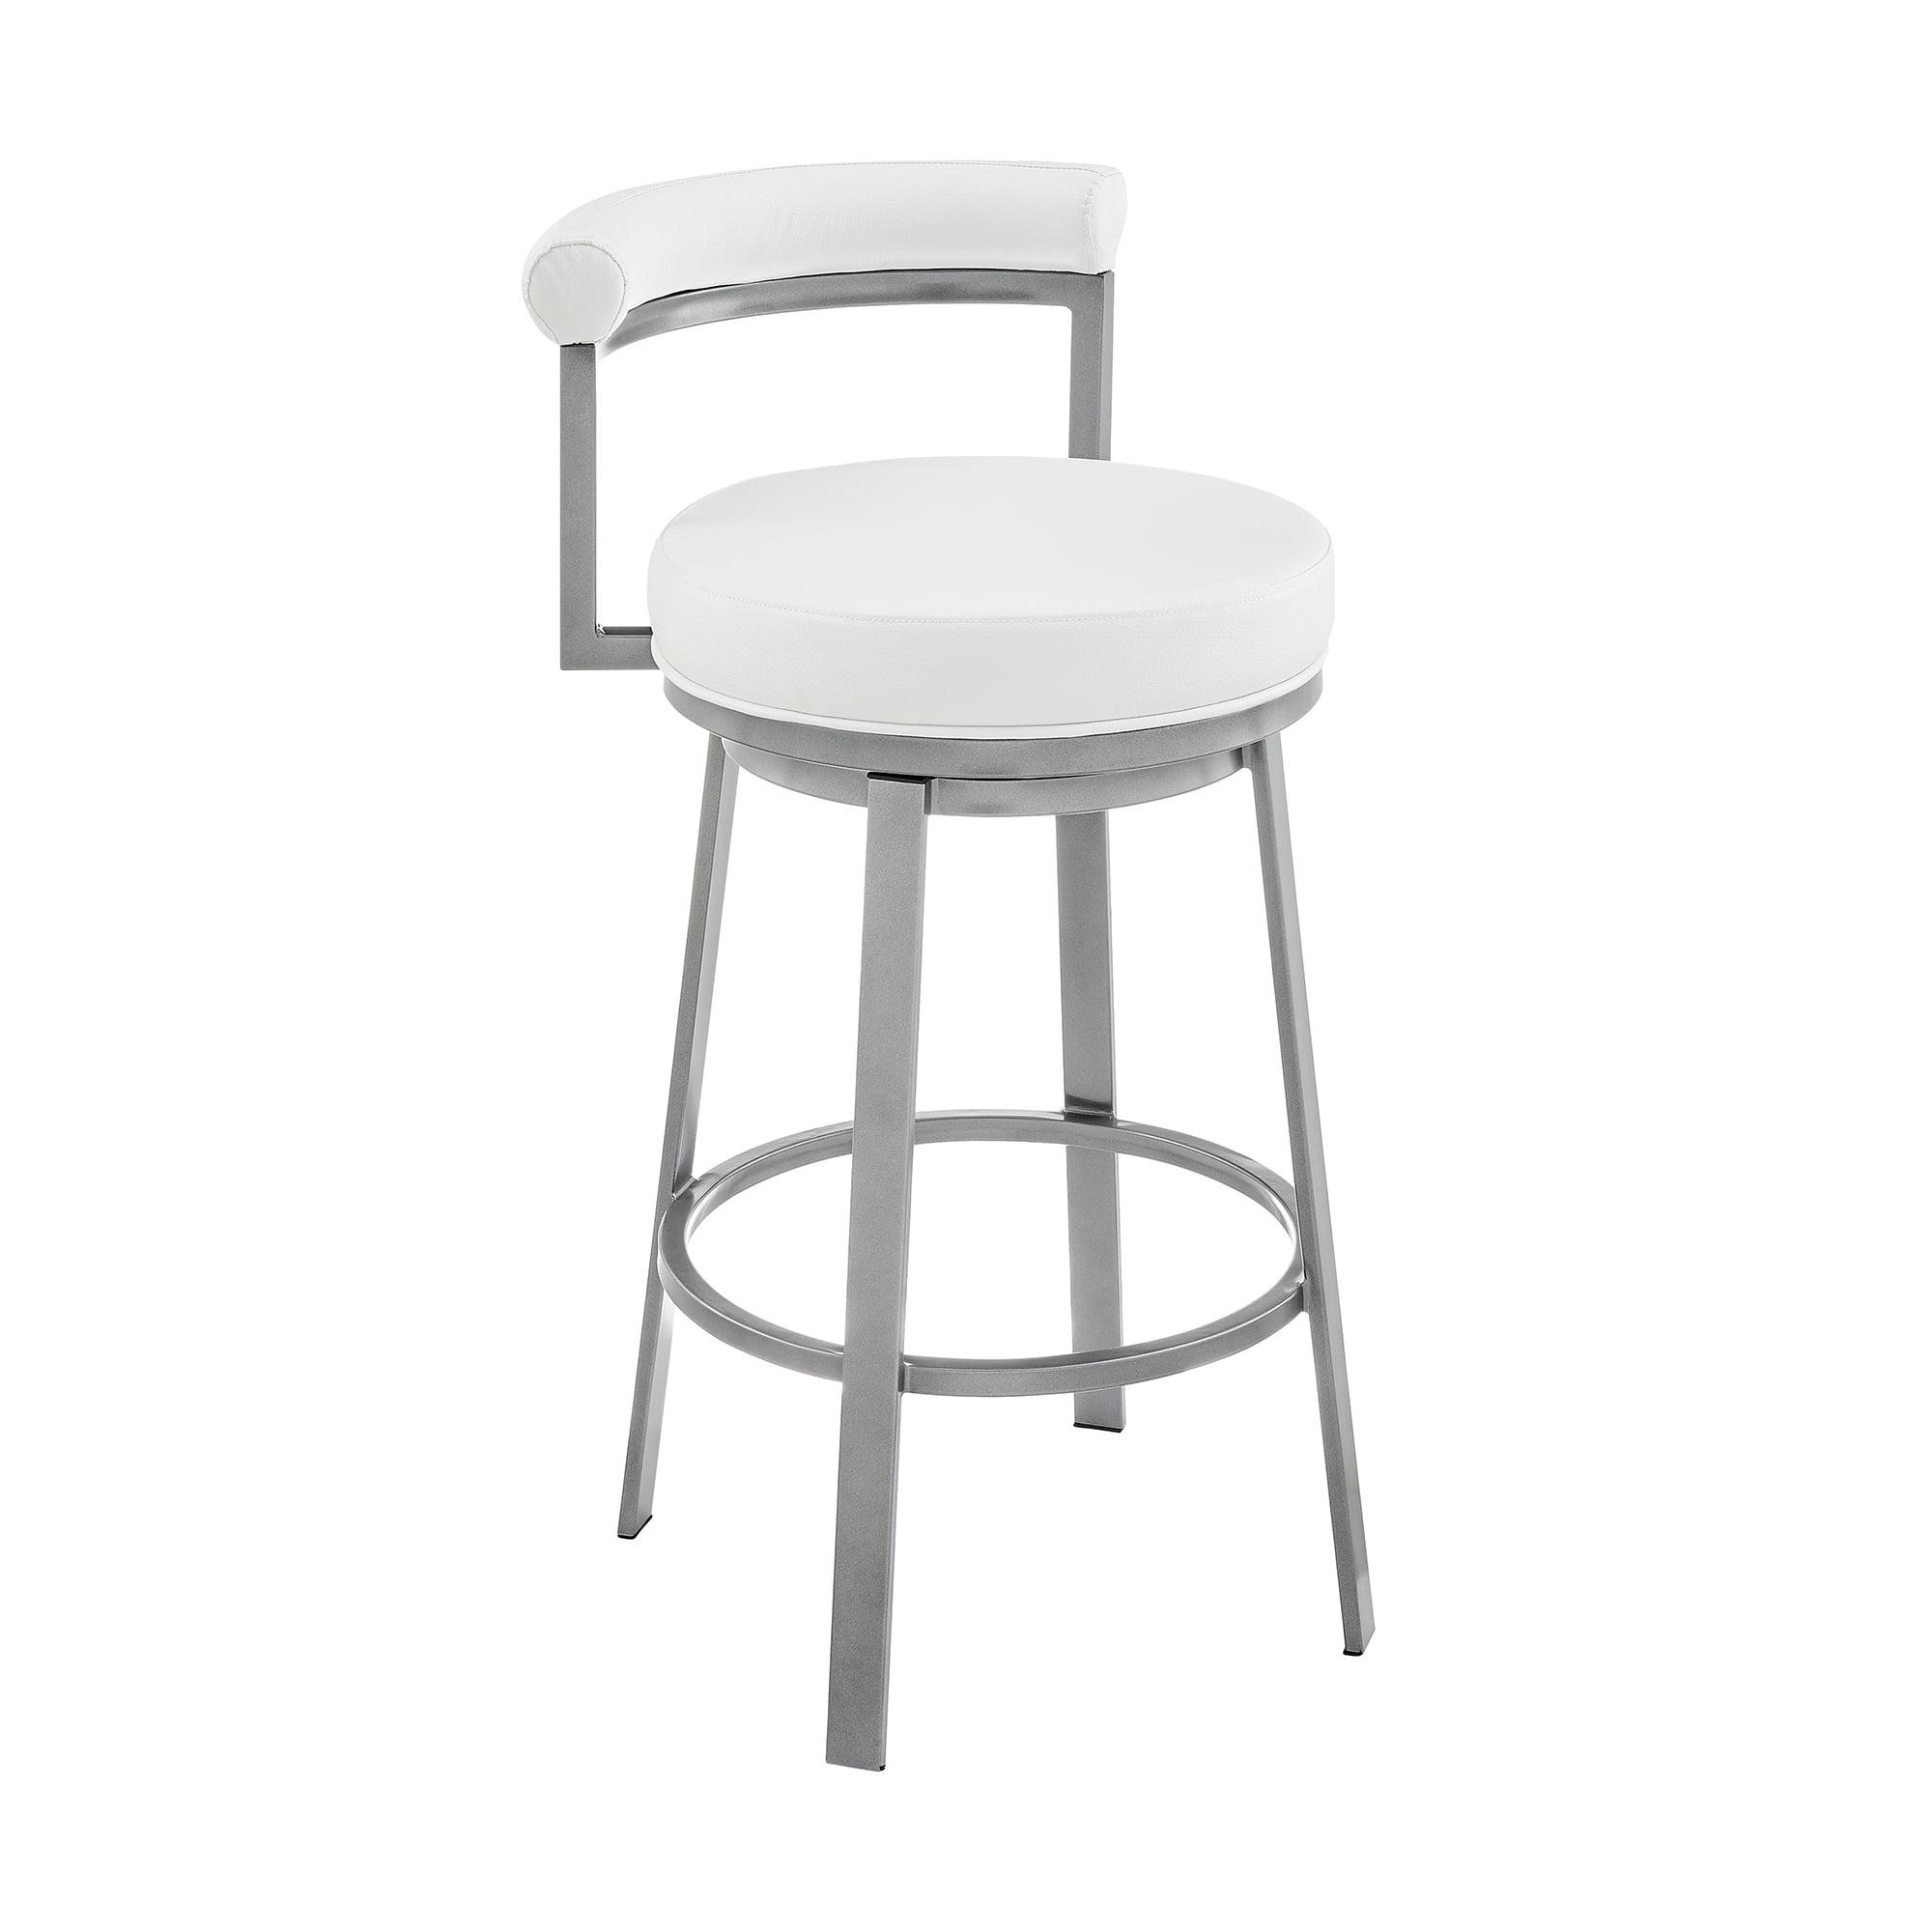 Modern Swivel Adjustable Bar Stool in White Faux Leather